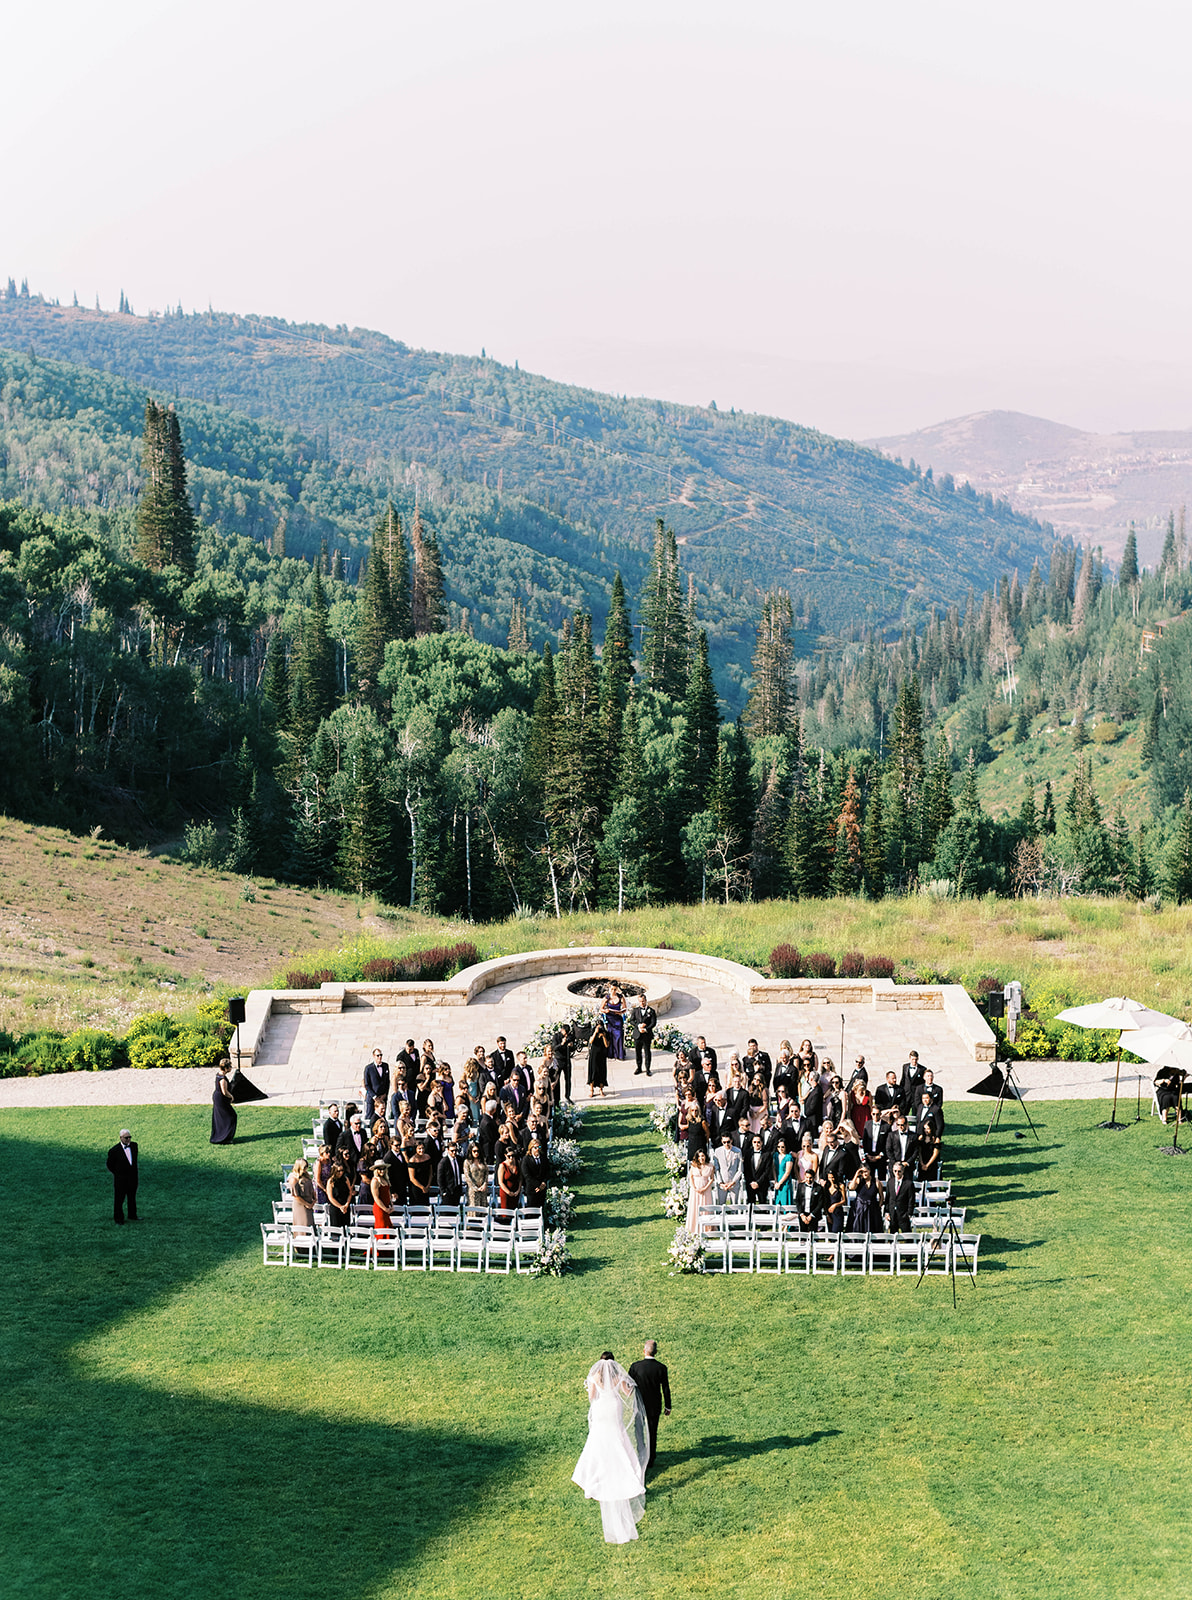 a bride walks towards her groom at this mountain wedding at montage deer valley resort in park city utah. photo by megan robinson photography